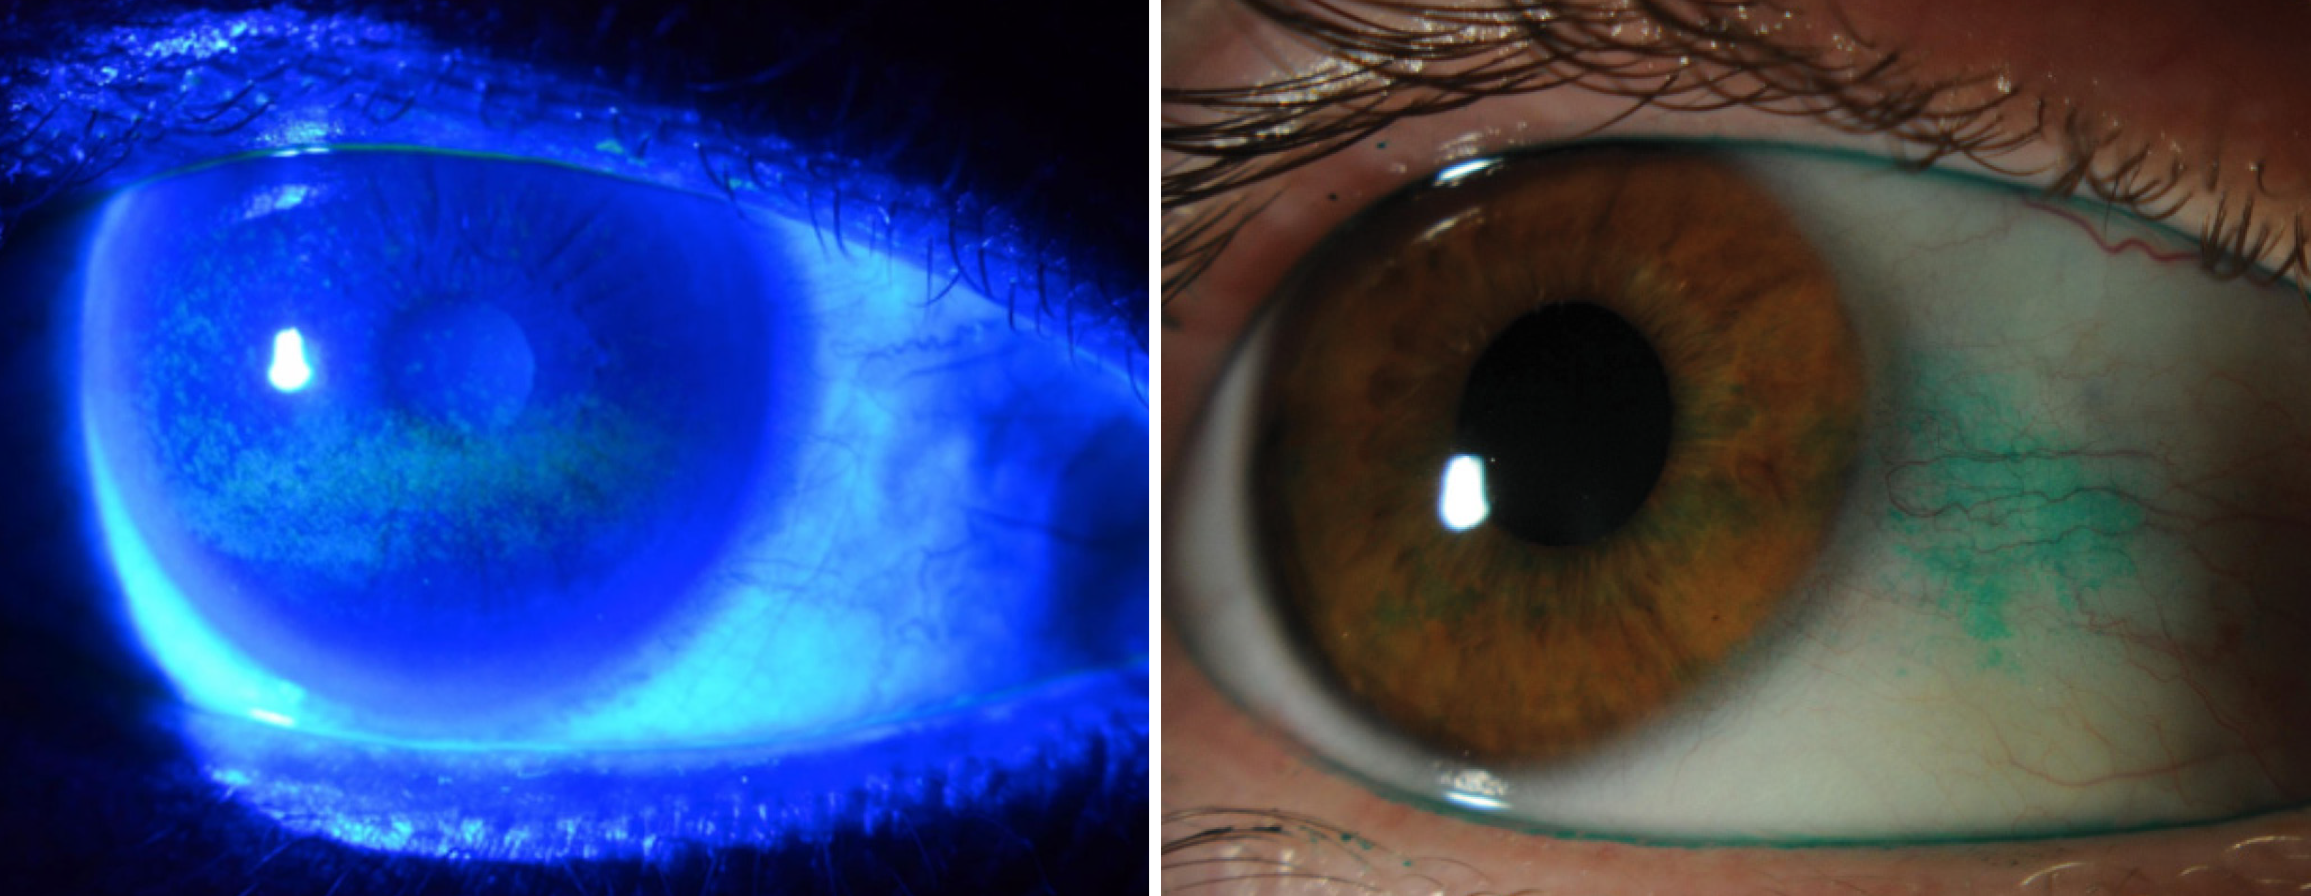 Clinicians will get more true-to-life assessments of presumed dry eye by using a range of tests, with special attention to staining patterns.